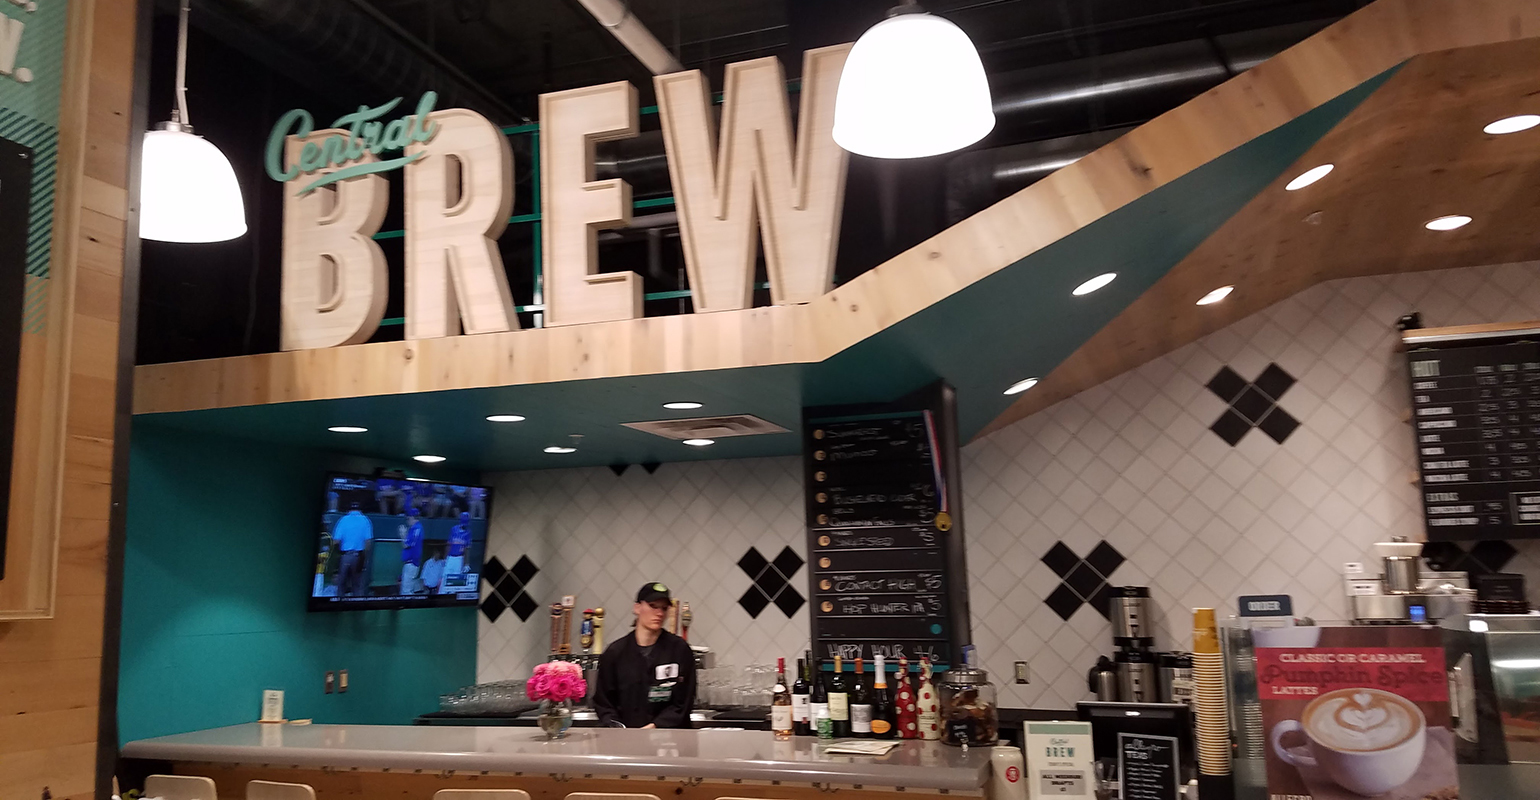 Whole Foods' urbanized St. Louis store includes a Central Brew station complete with draft beer, a wine bar and coffee-to-go.